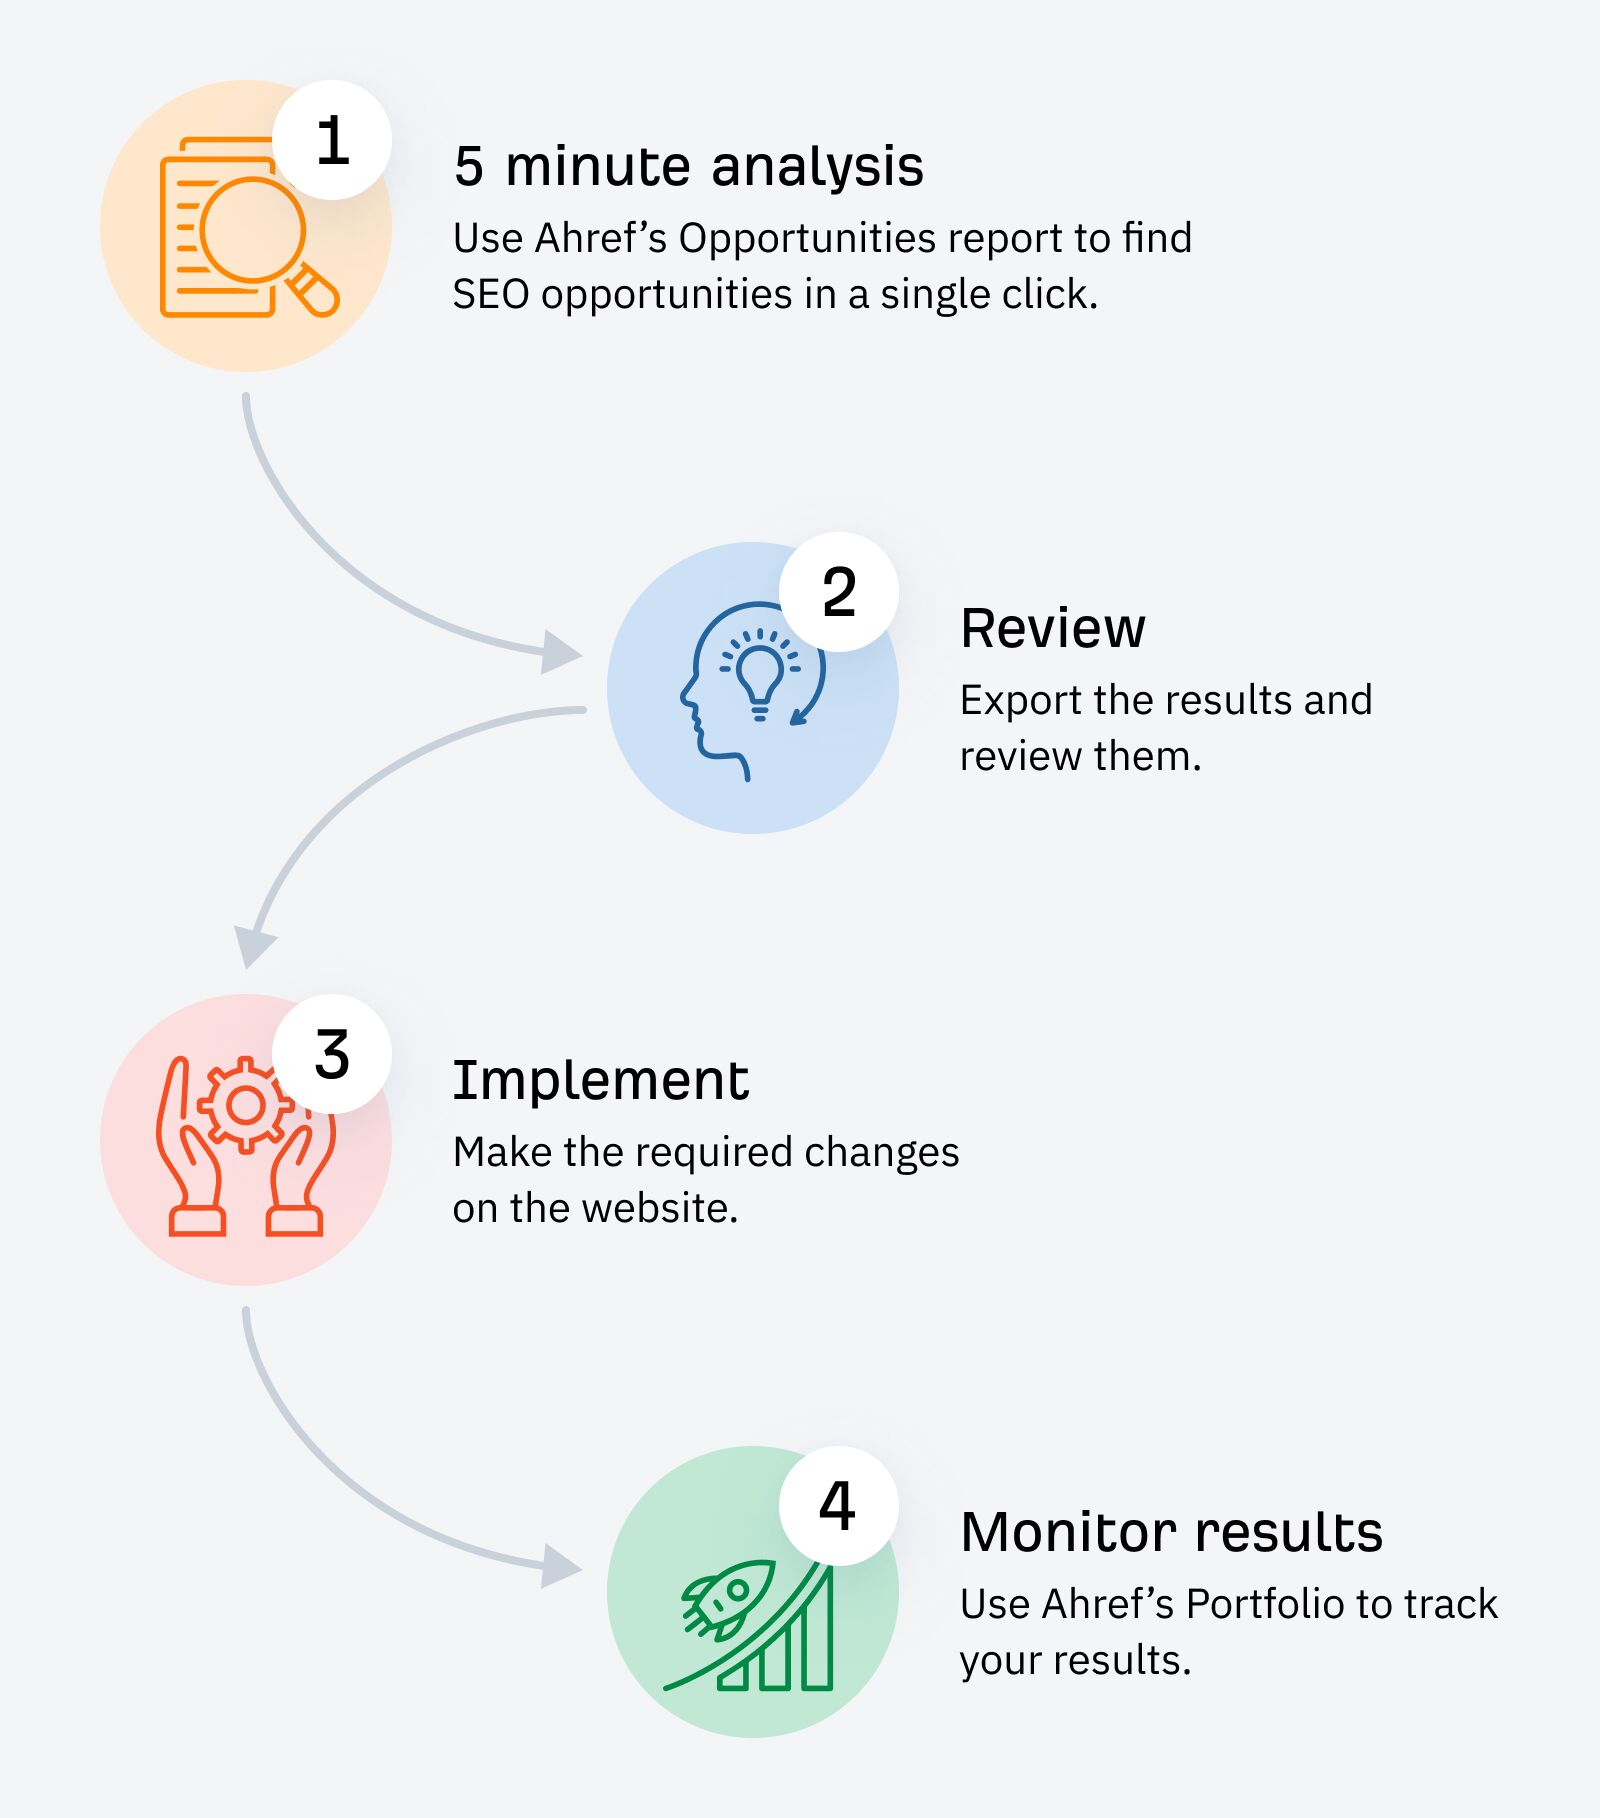 accelerate-seo-with-ahrefs-opportuntiies-report Quick SEO: 8 Ways to Accelerate SEO Results From Months to Days